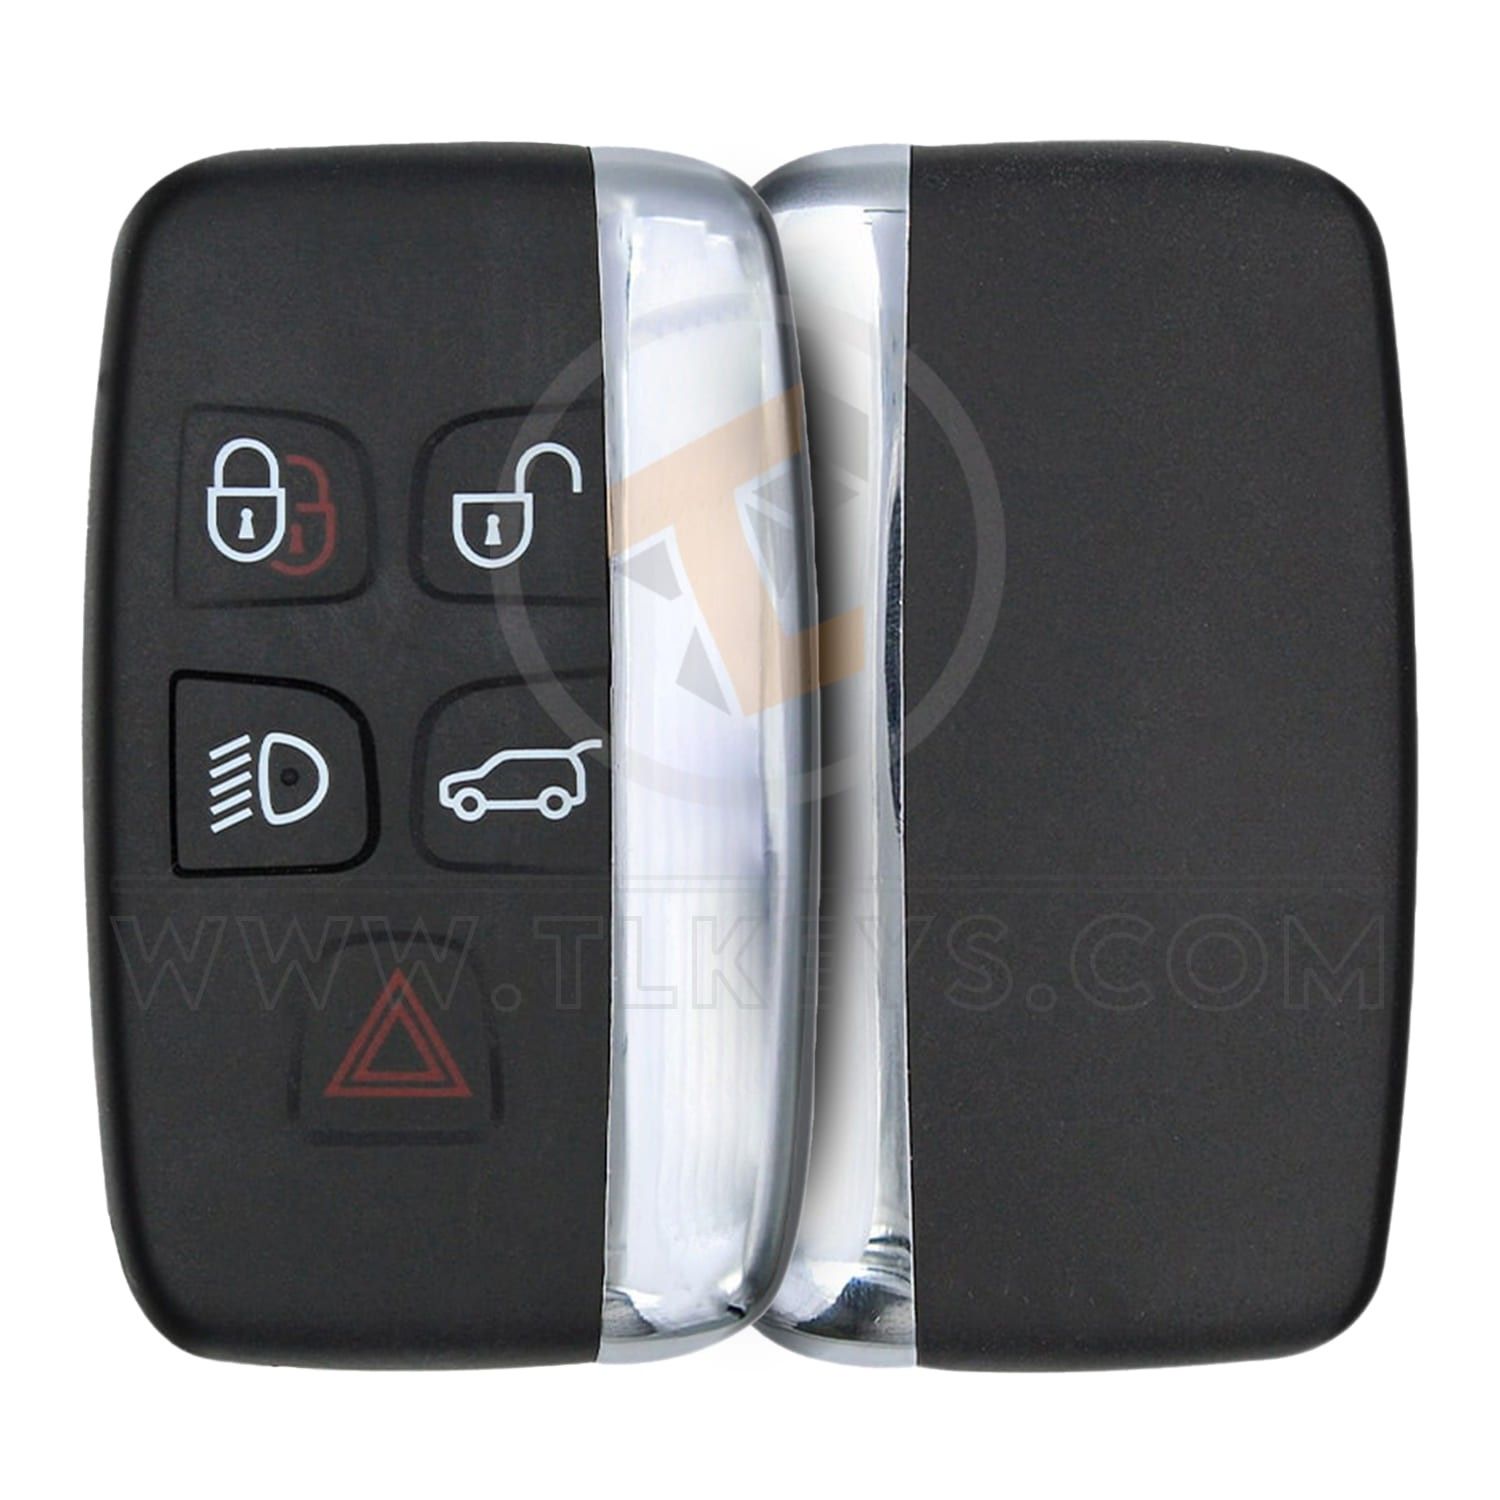 Land Rover Evoque Sport Vogue 2010-2016 Smart Remote Shell 5 Buttons Remote Shell Type Smart Proximity Shell